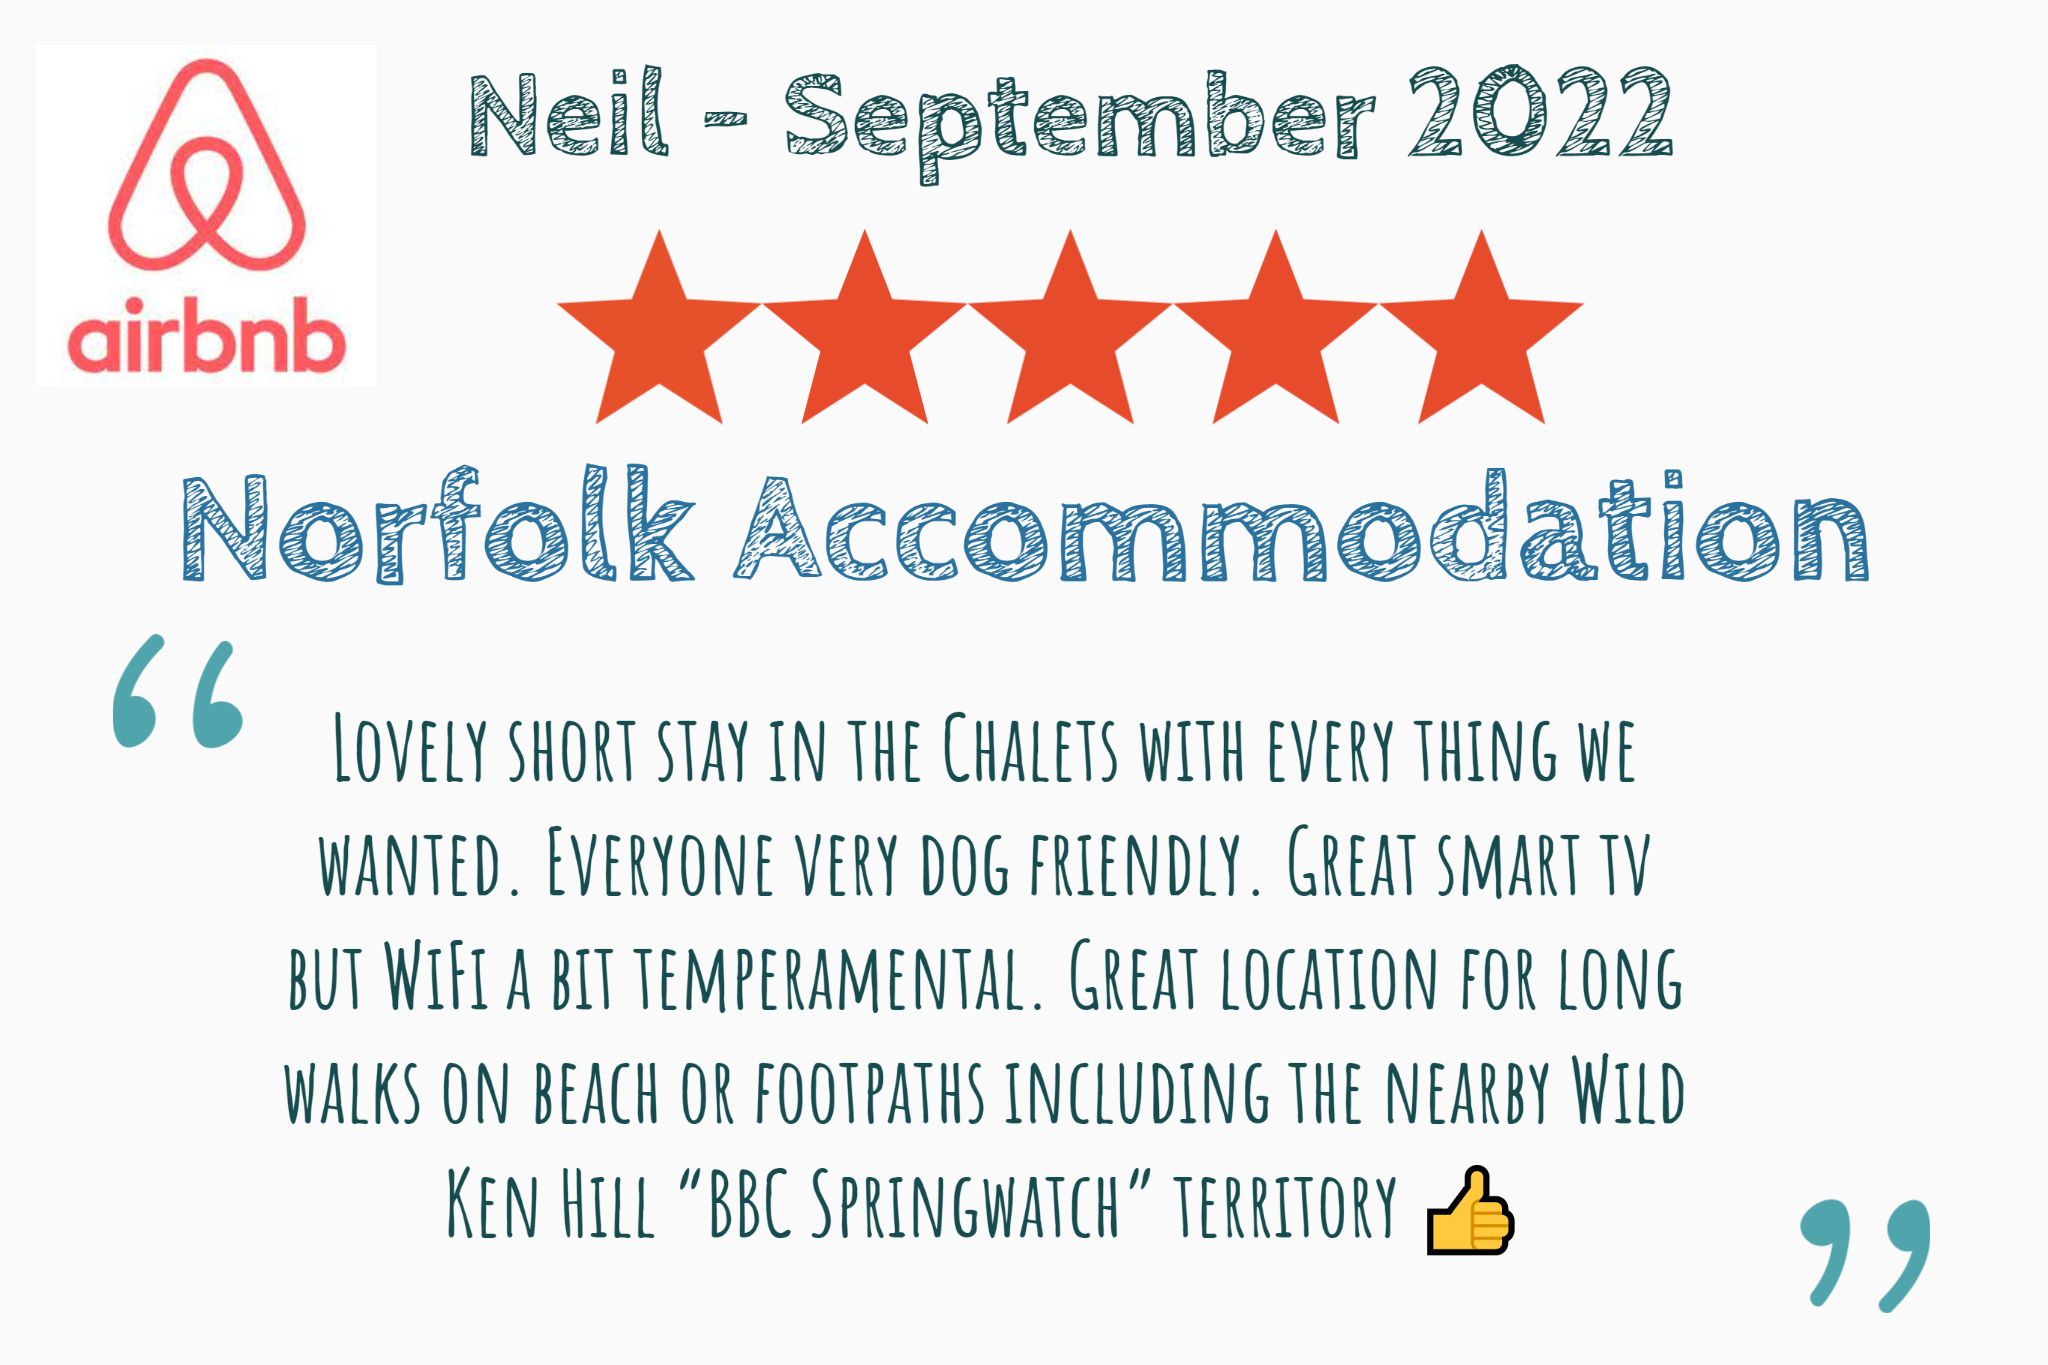 Neil's airbnb review about BBC springwatch